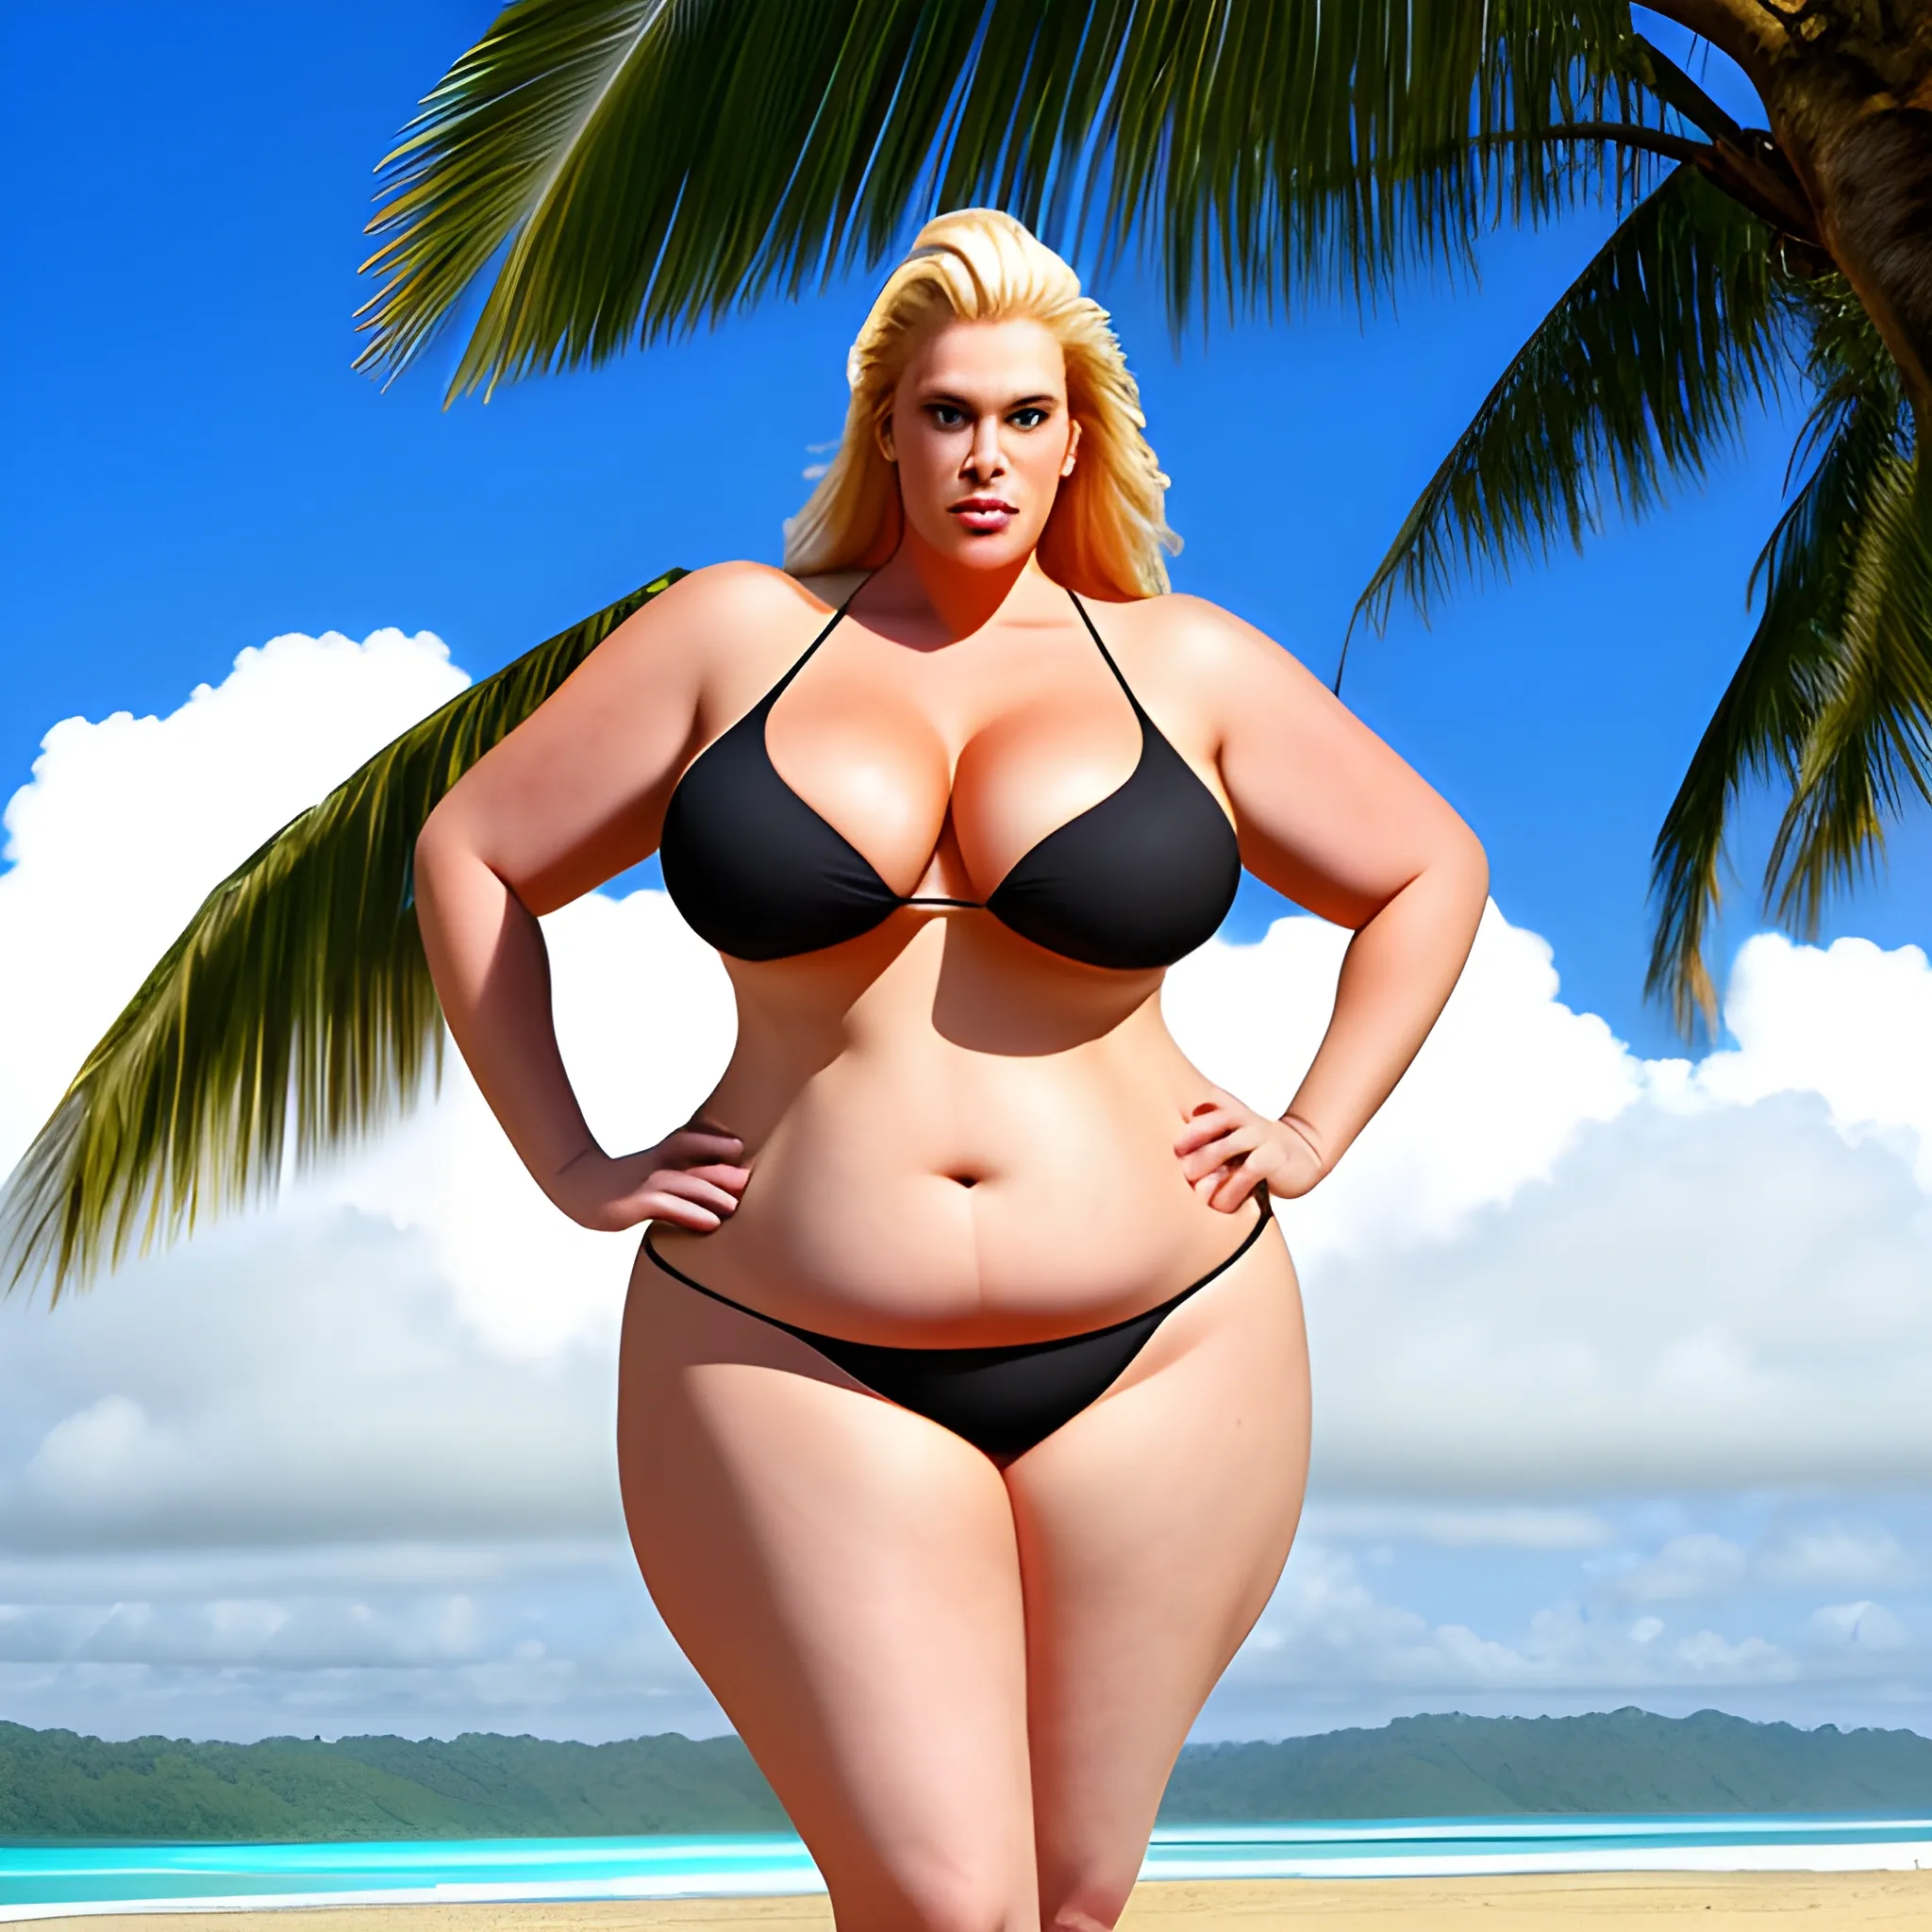 huge tall and strong plus size blonde calm young girl with small 